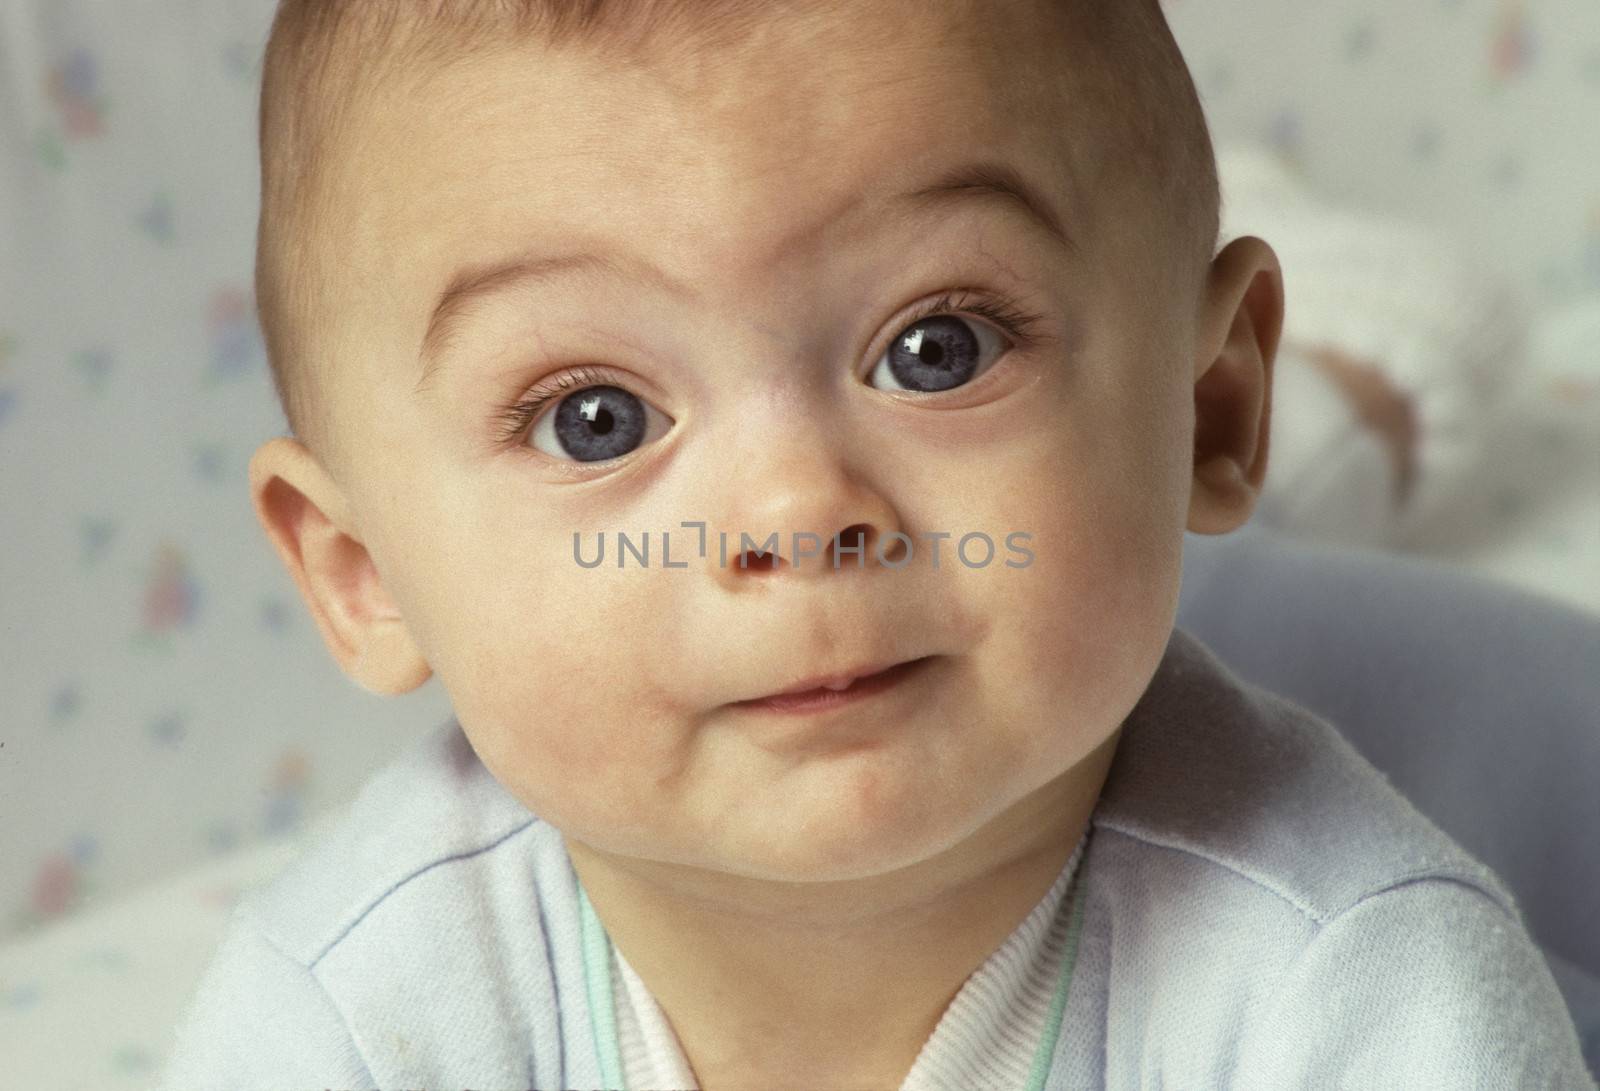 Baby with wide eyes looking directly to camera with an inquistive expression